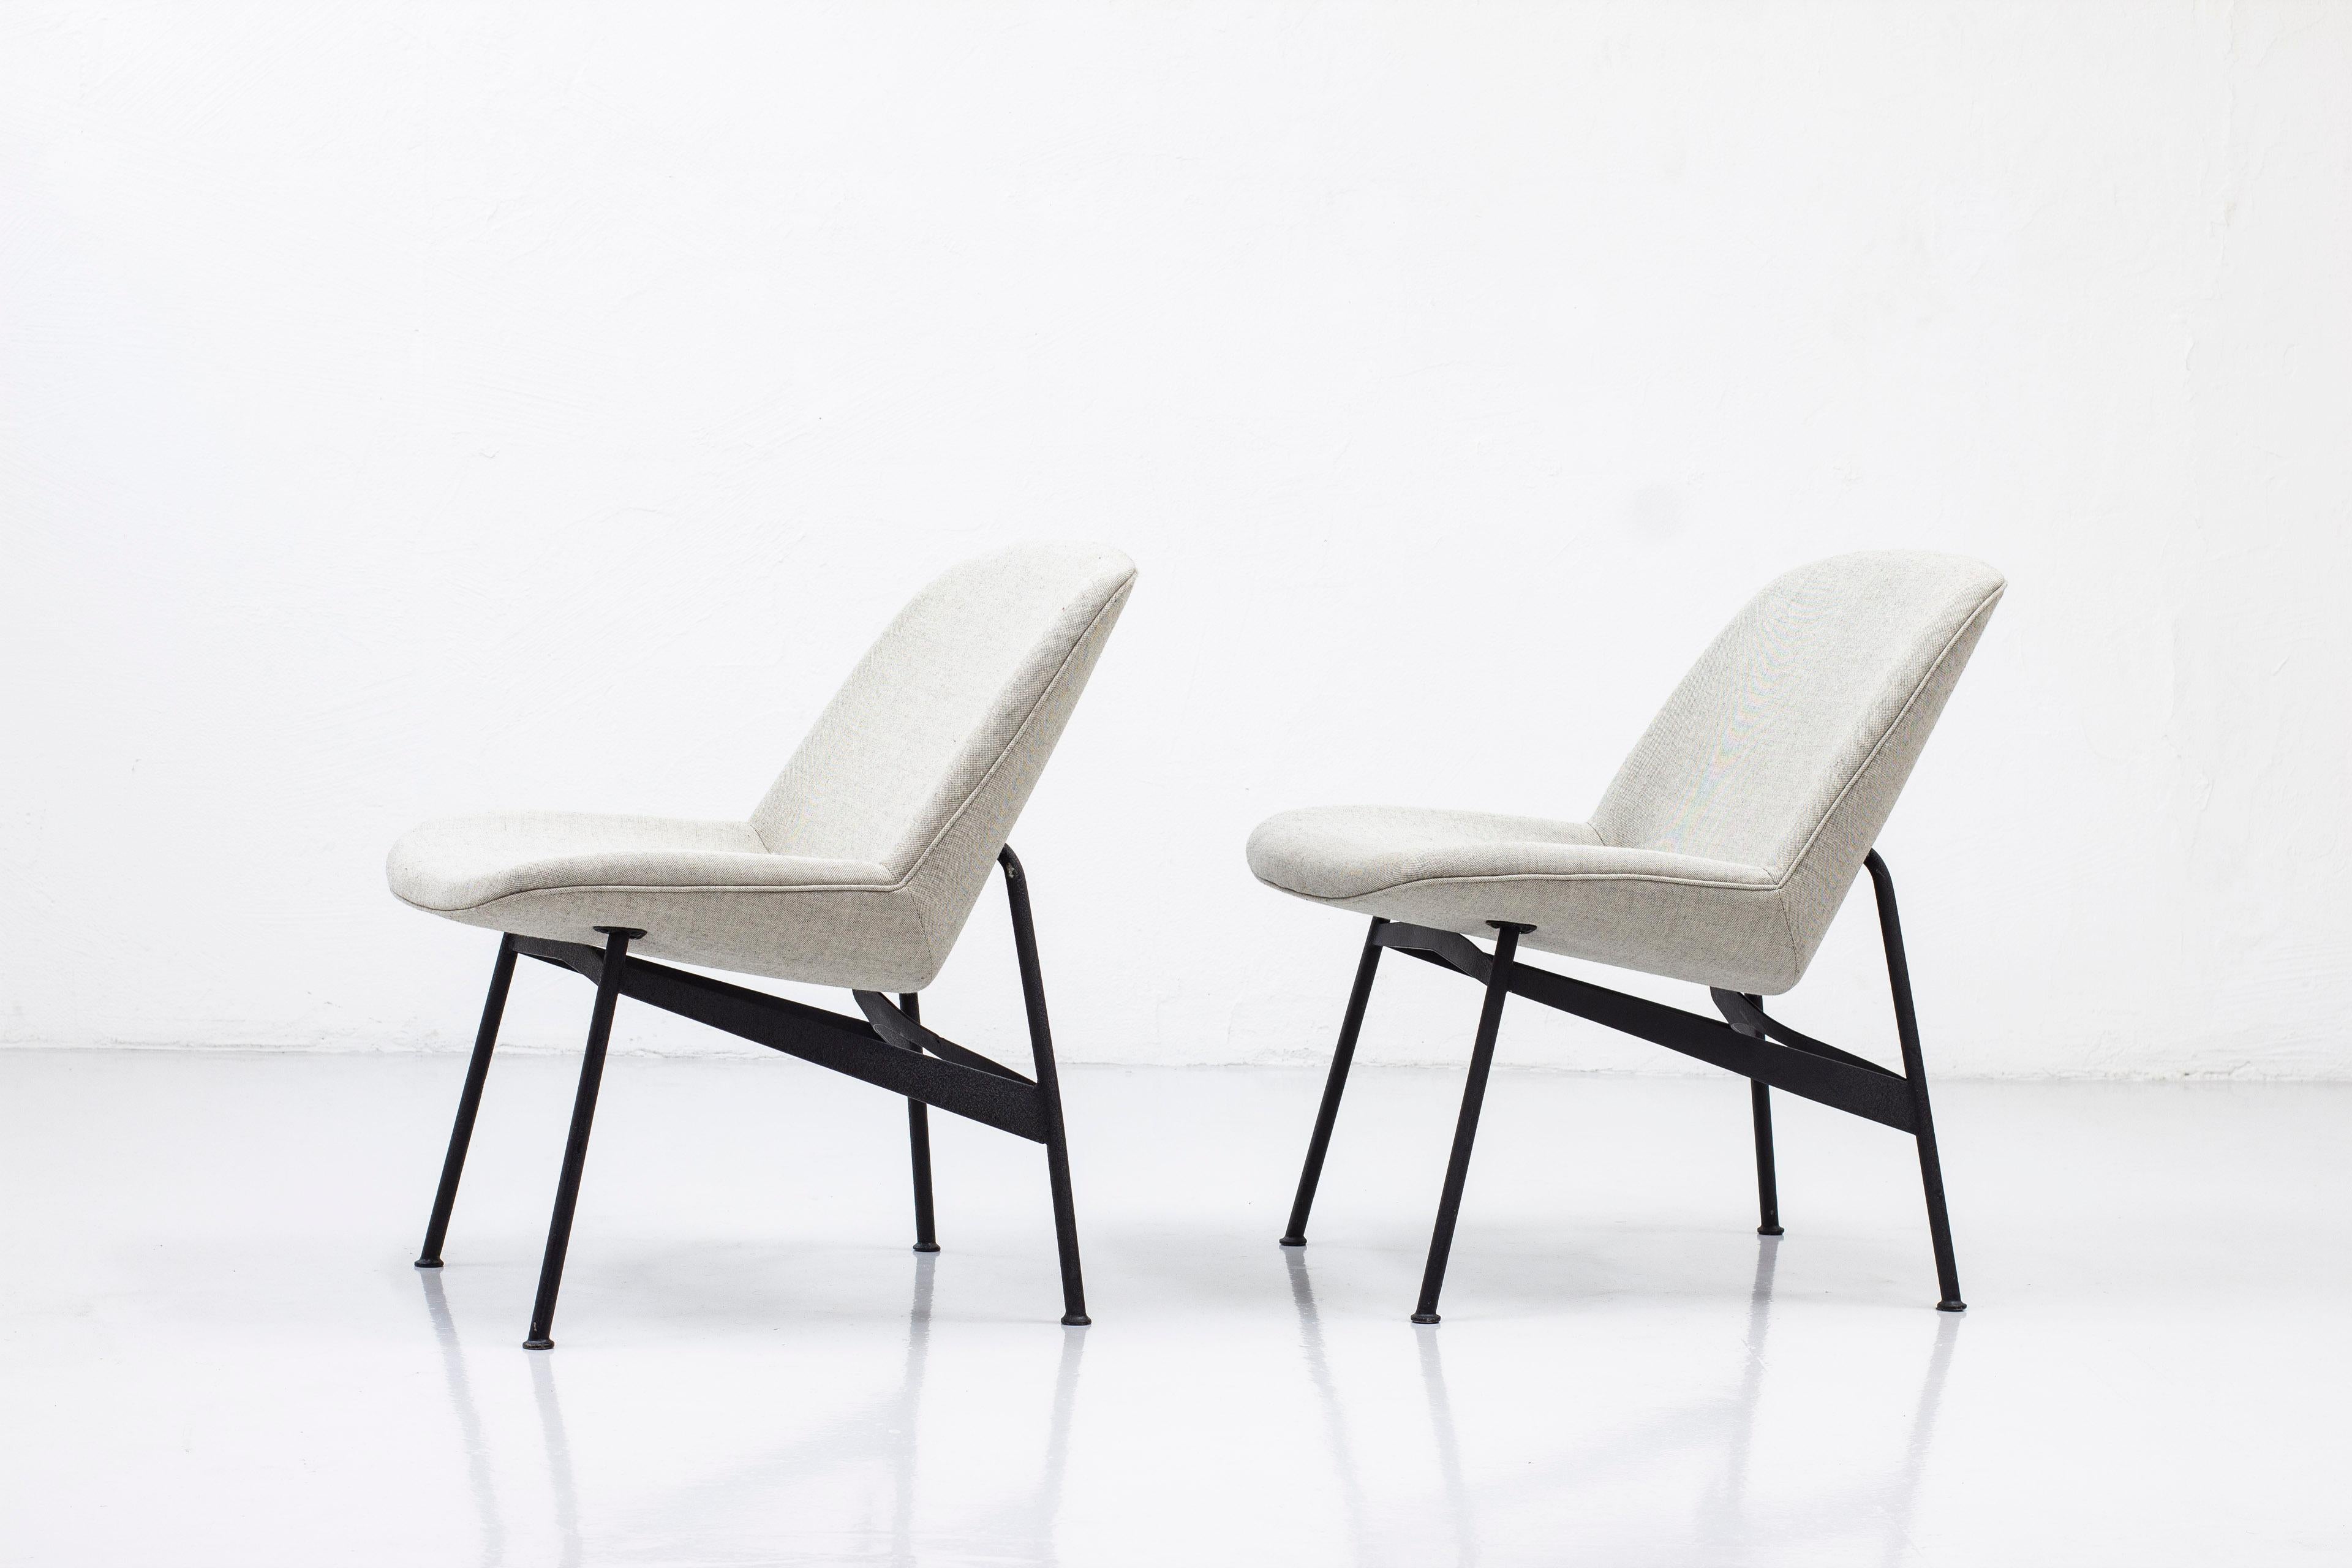 Rare lounge chairs designed by Hans Harald Molander. Produced by Nordiska Kompaniet during the 1950s. Made from black lacquered steel and upholstered seats. Reupholstered with wool fabric from Kvadrat textiles in light grey melange. Very good